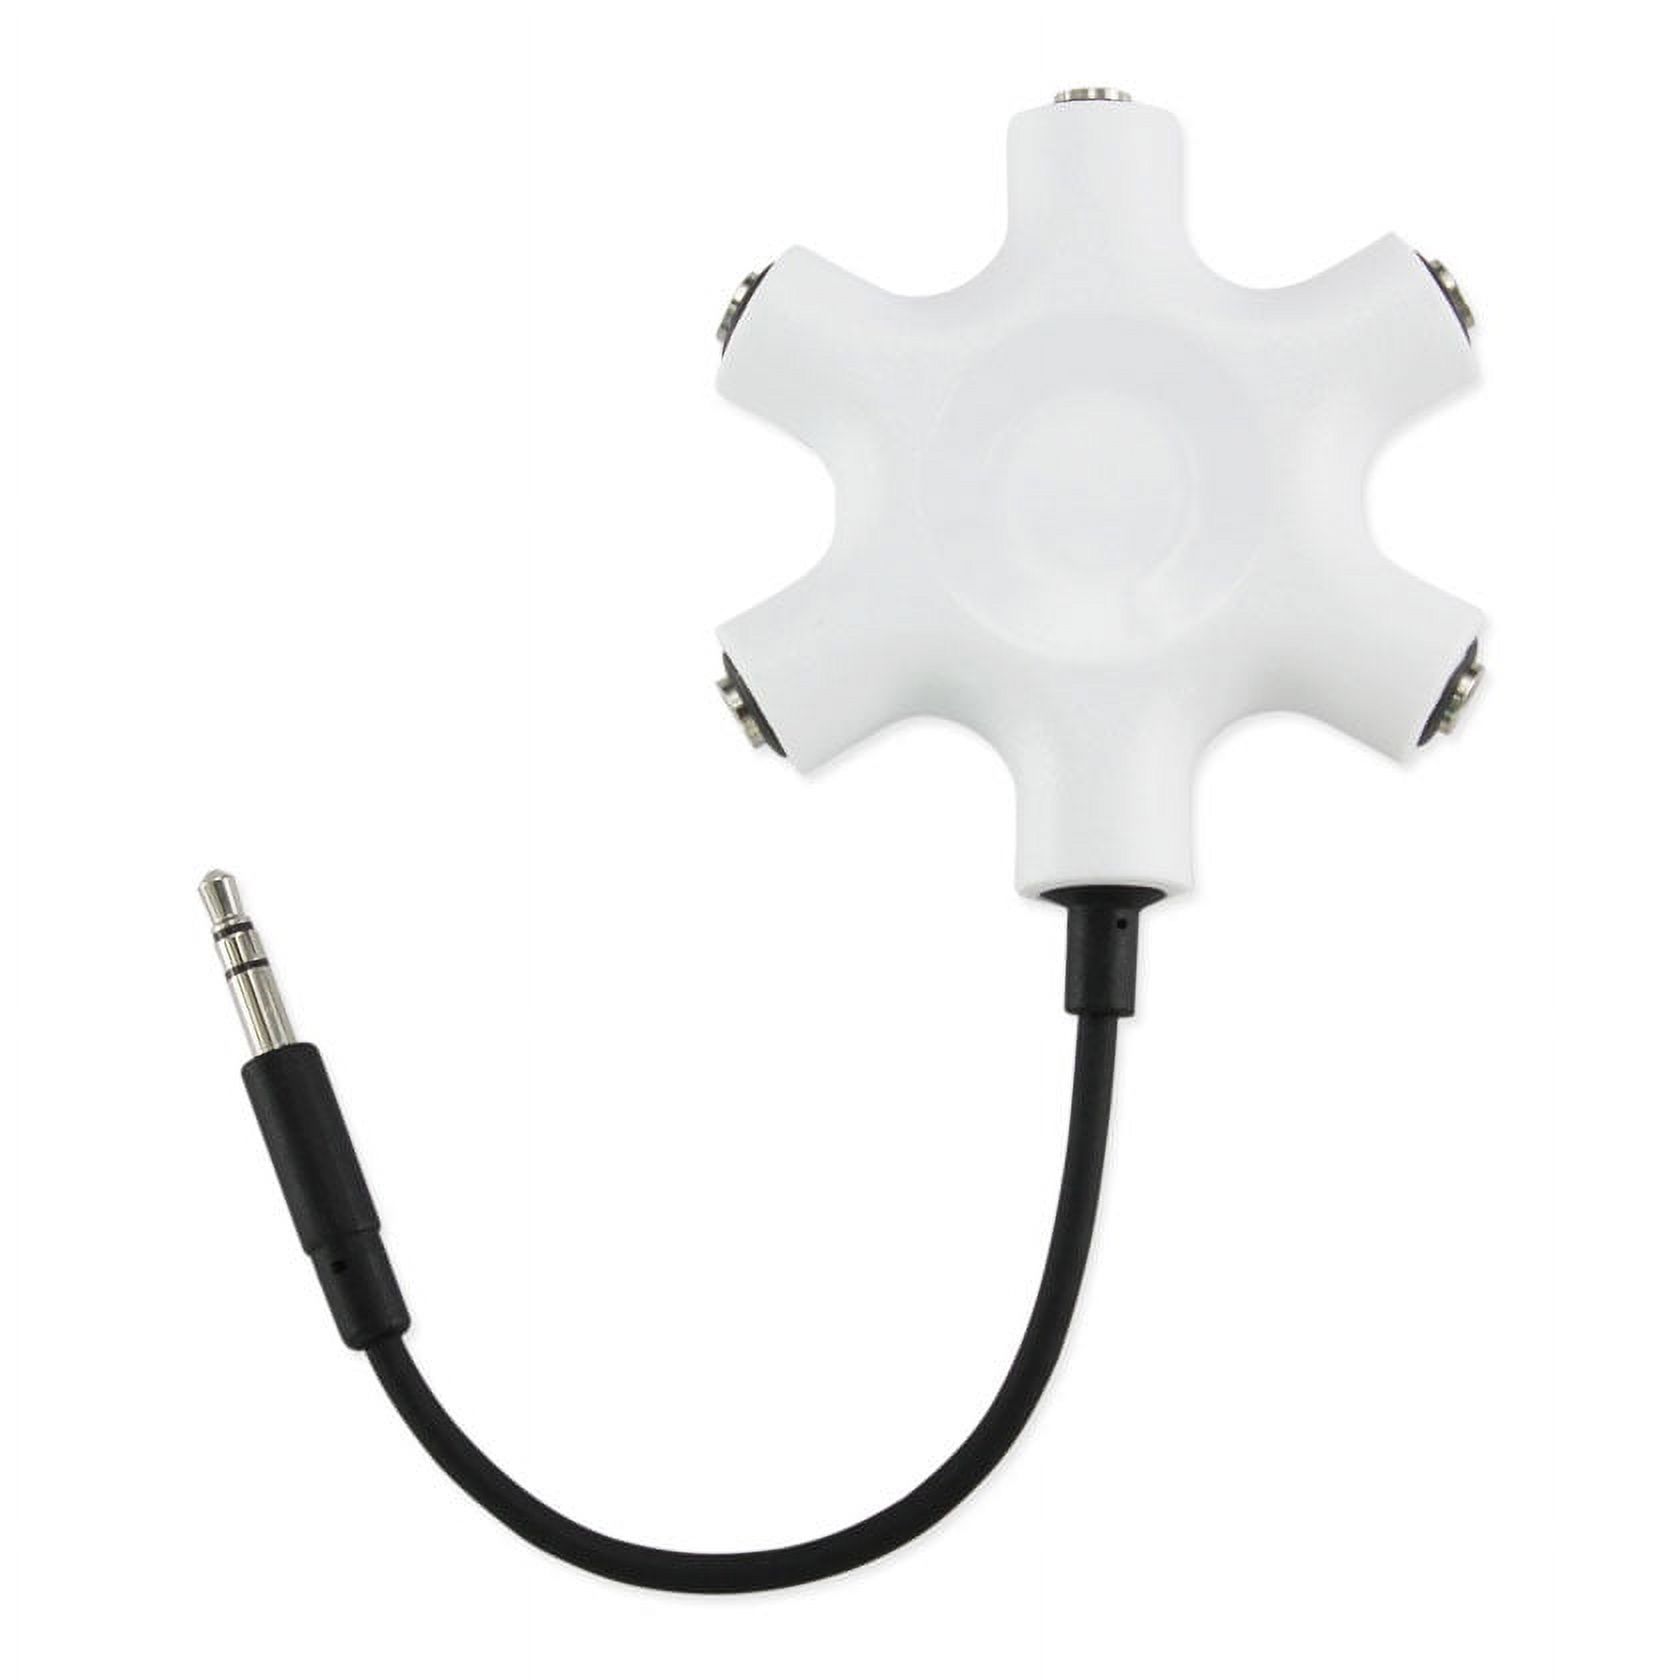 6-port Multi Headphone Splitter With 5 Inches Stereo Jeck Adapter In White - image 1 of 2